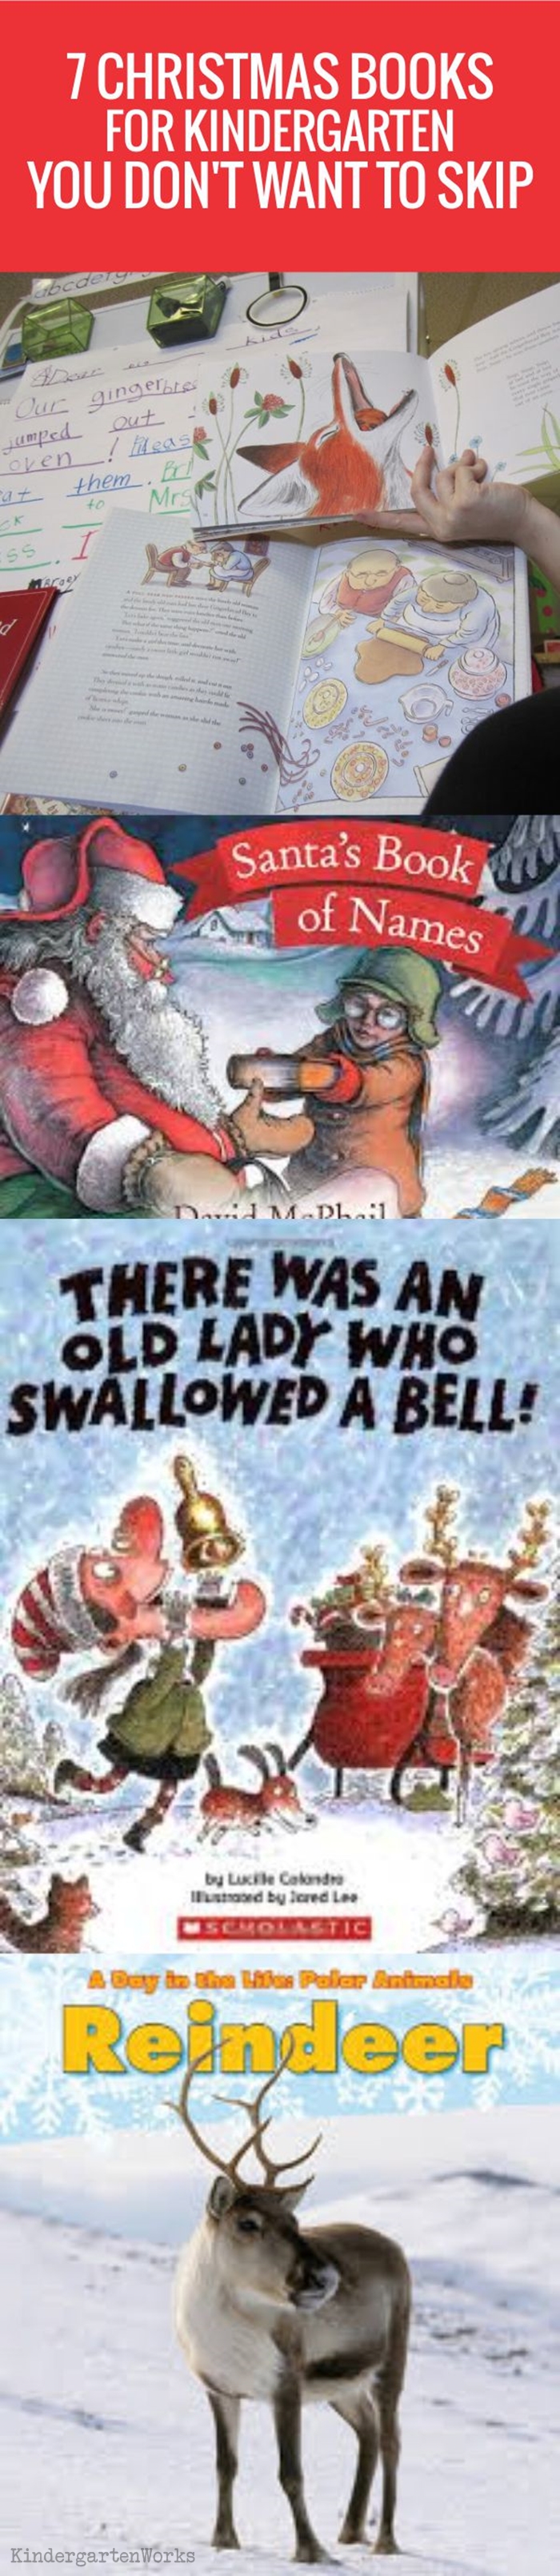 7 Christmas Books for Kindergarten You Don't Want to Skip - this list is perfect for my classroom